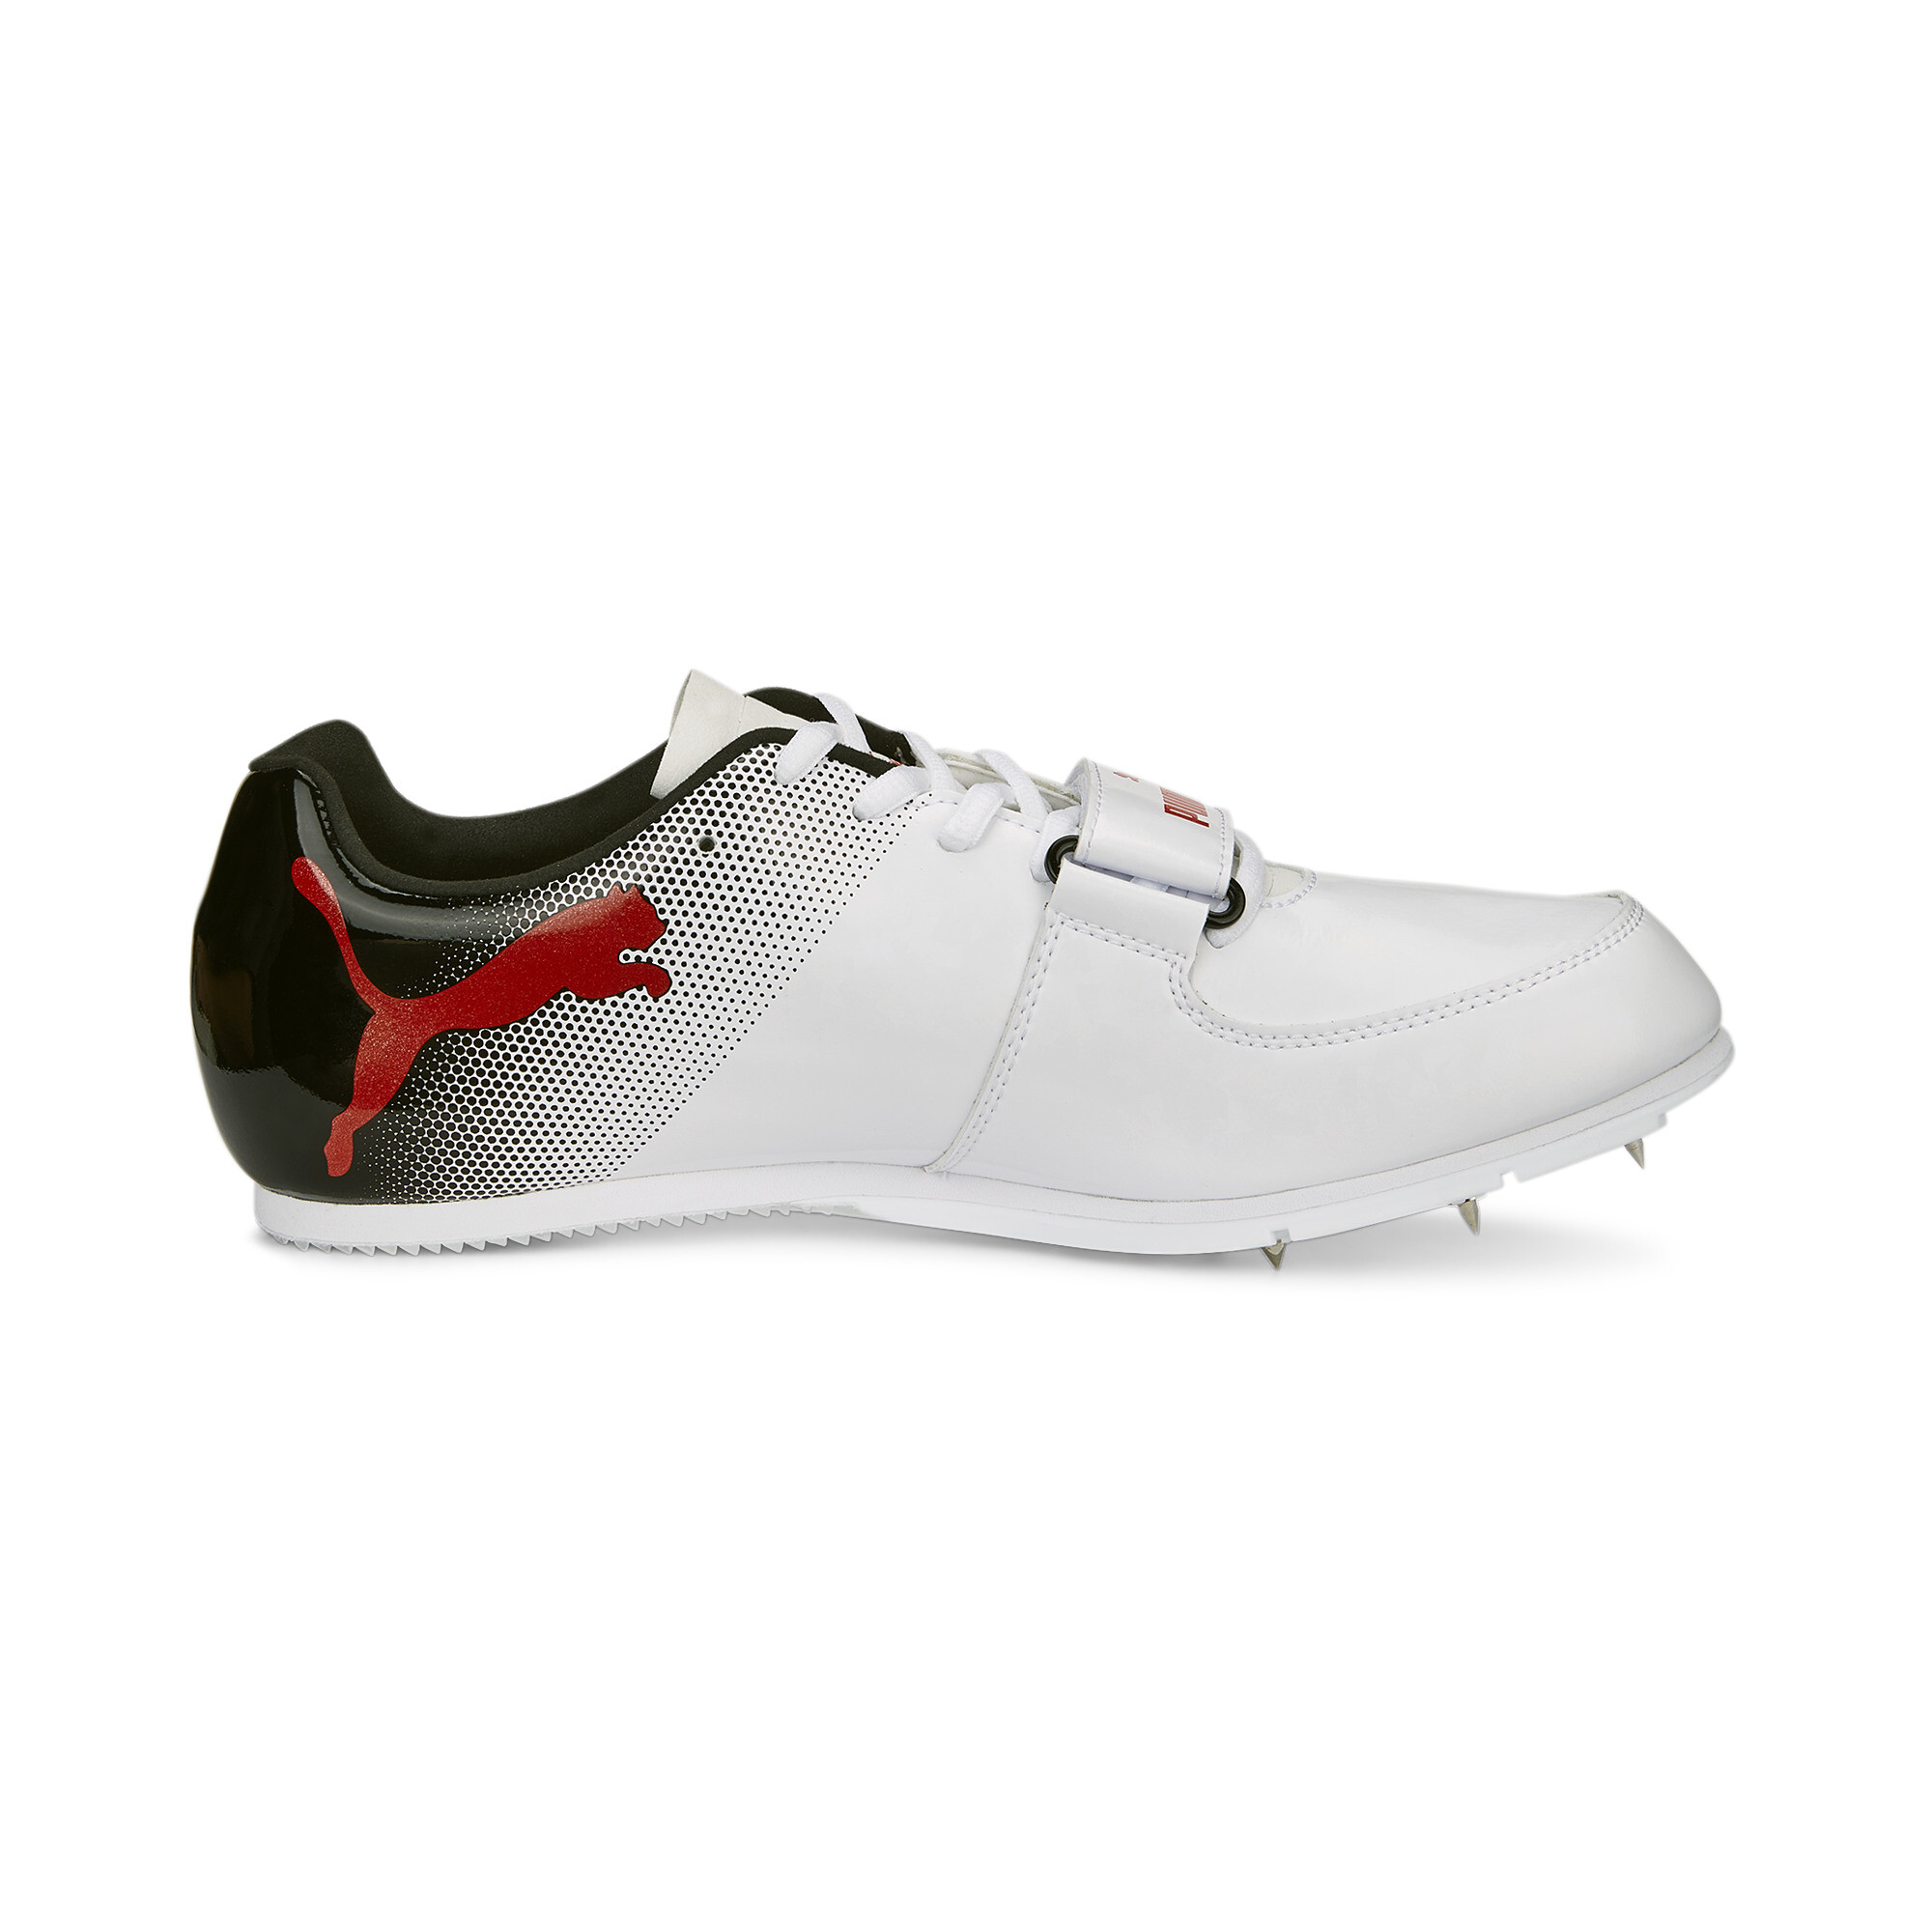 Puma Evo SPEED Long Jump 10 Track And Field Shoes, White, Size 40.5, Shoes